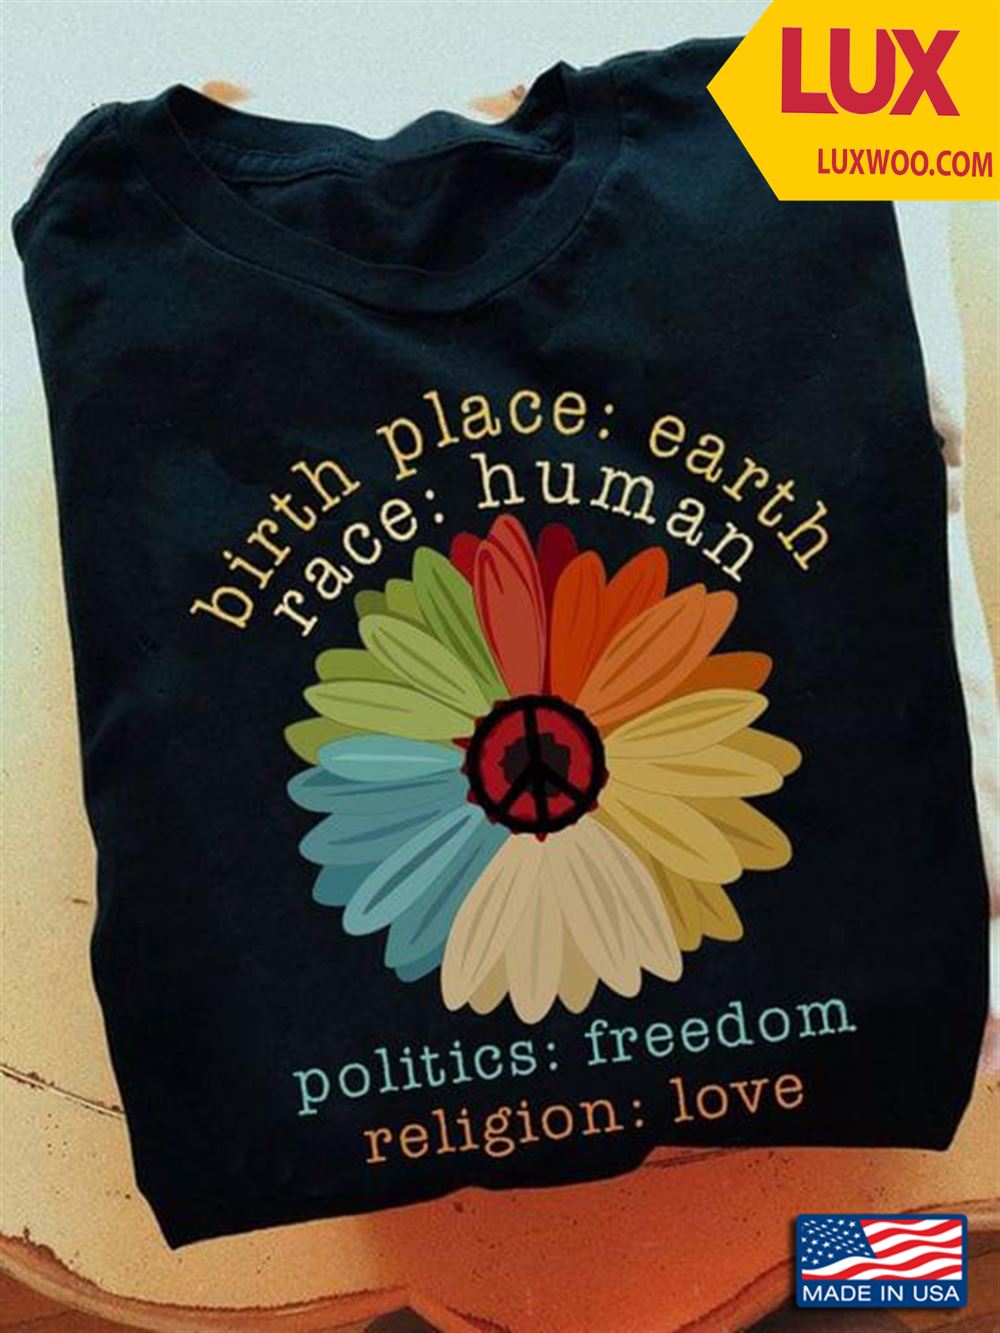 Birth Place Earth Race Human Politics Freedom Religion Love Shirt Size Up To 5xl